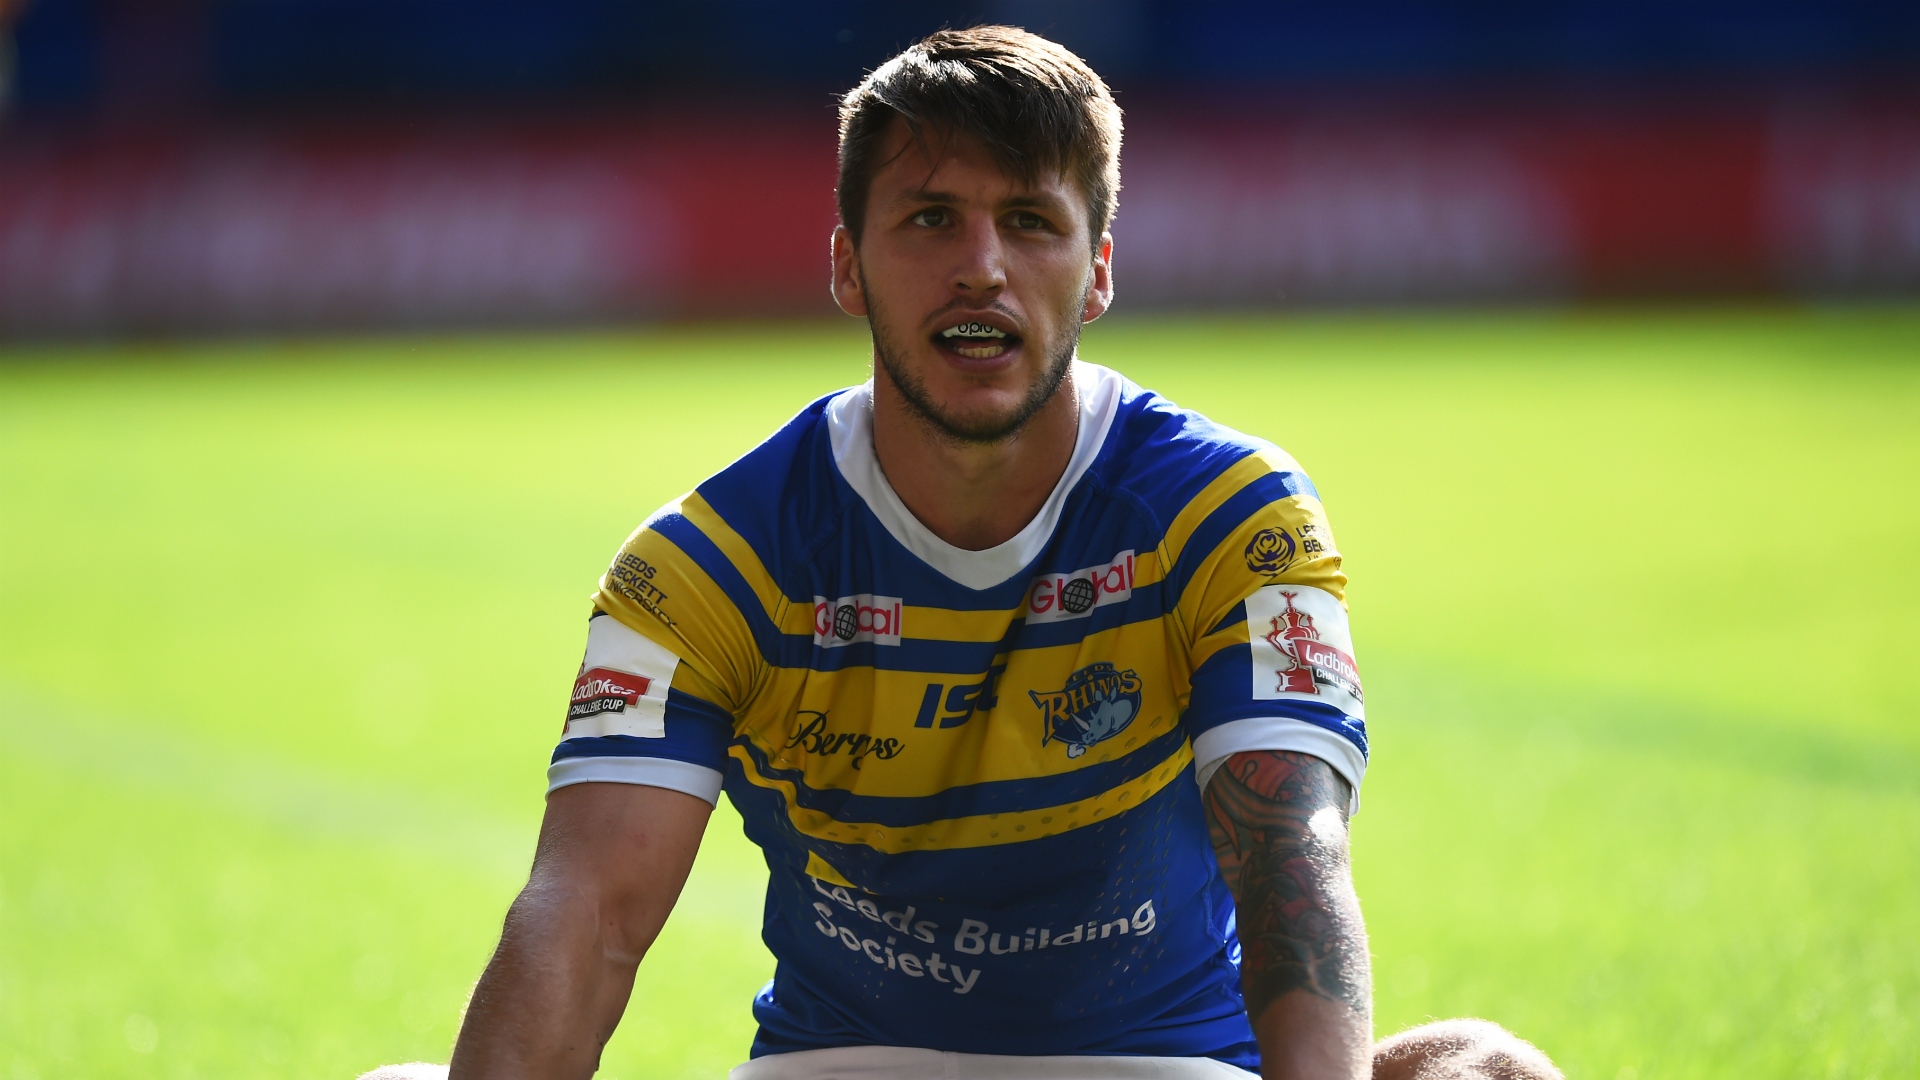 Super League table-toppers St Helens moved 10 points clear after a 32-10 win over Wigan Warriors, while Salford surprised Warrington.